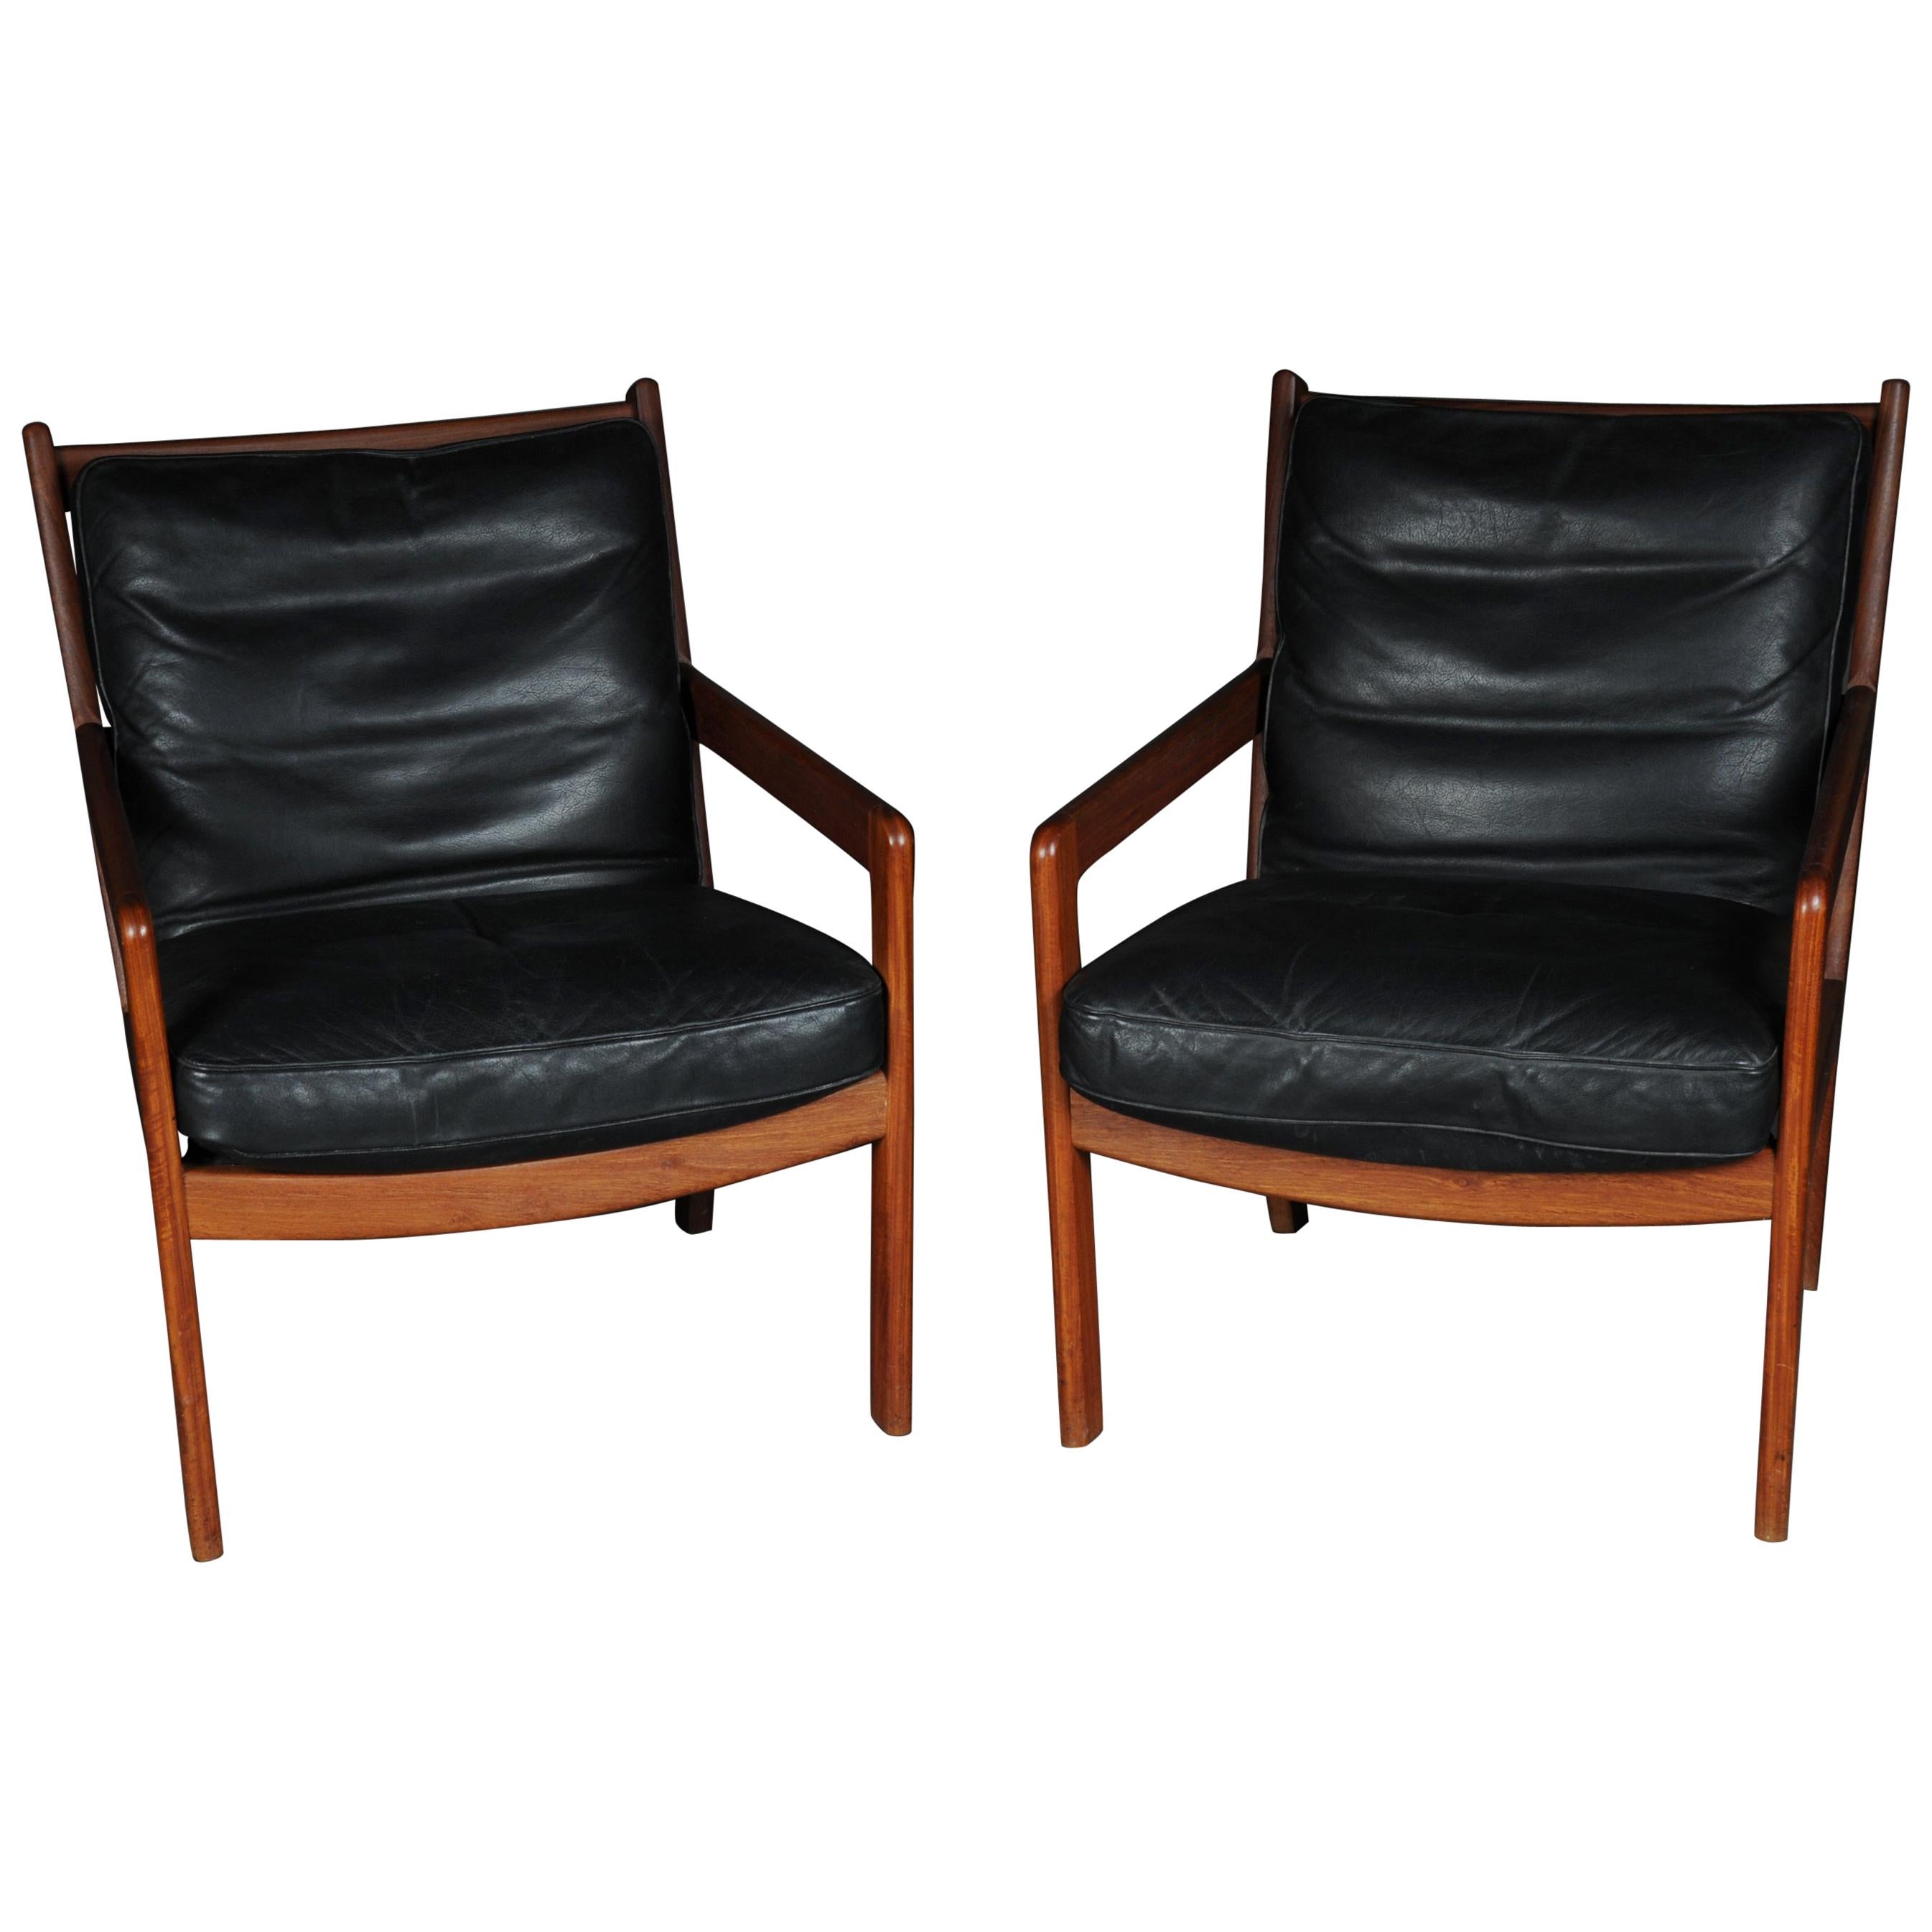 Pair of Vintage Teak Armchairs, Chairs, 1960s-1970s, Danish For Sale